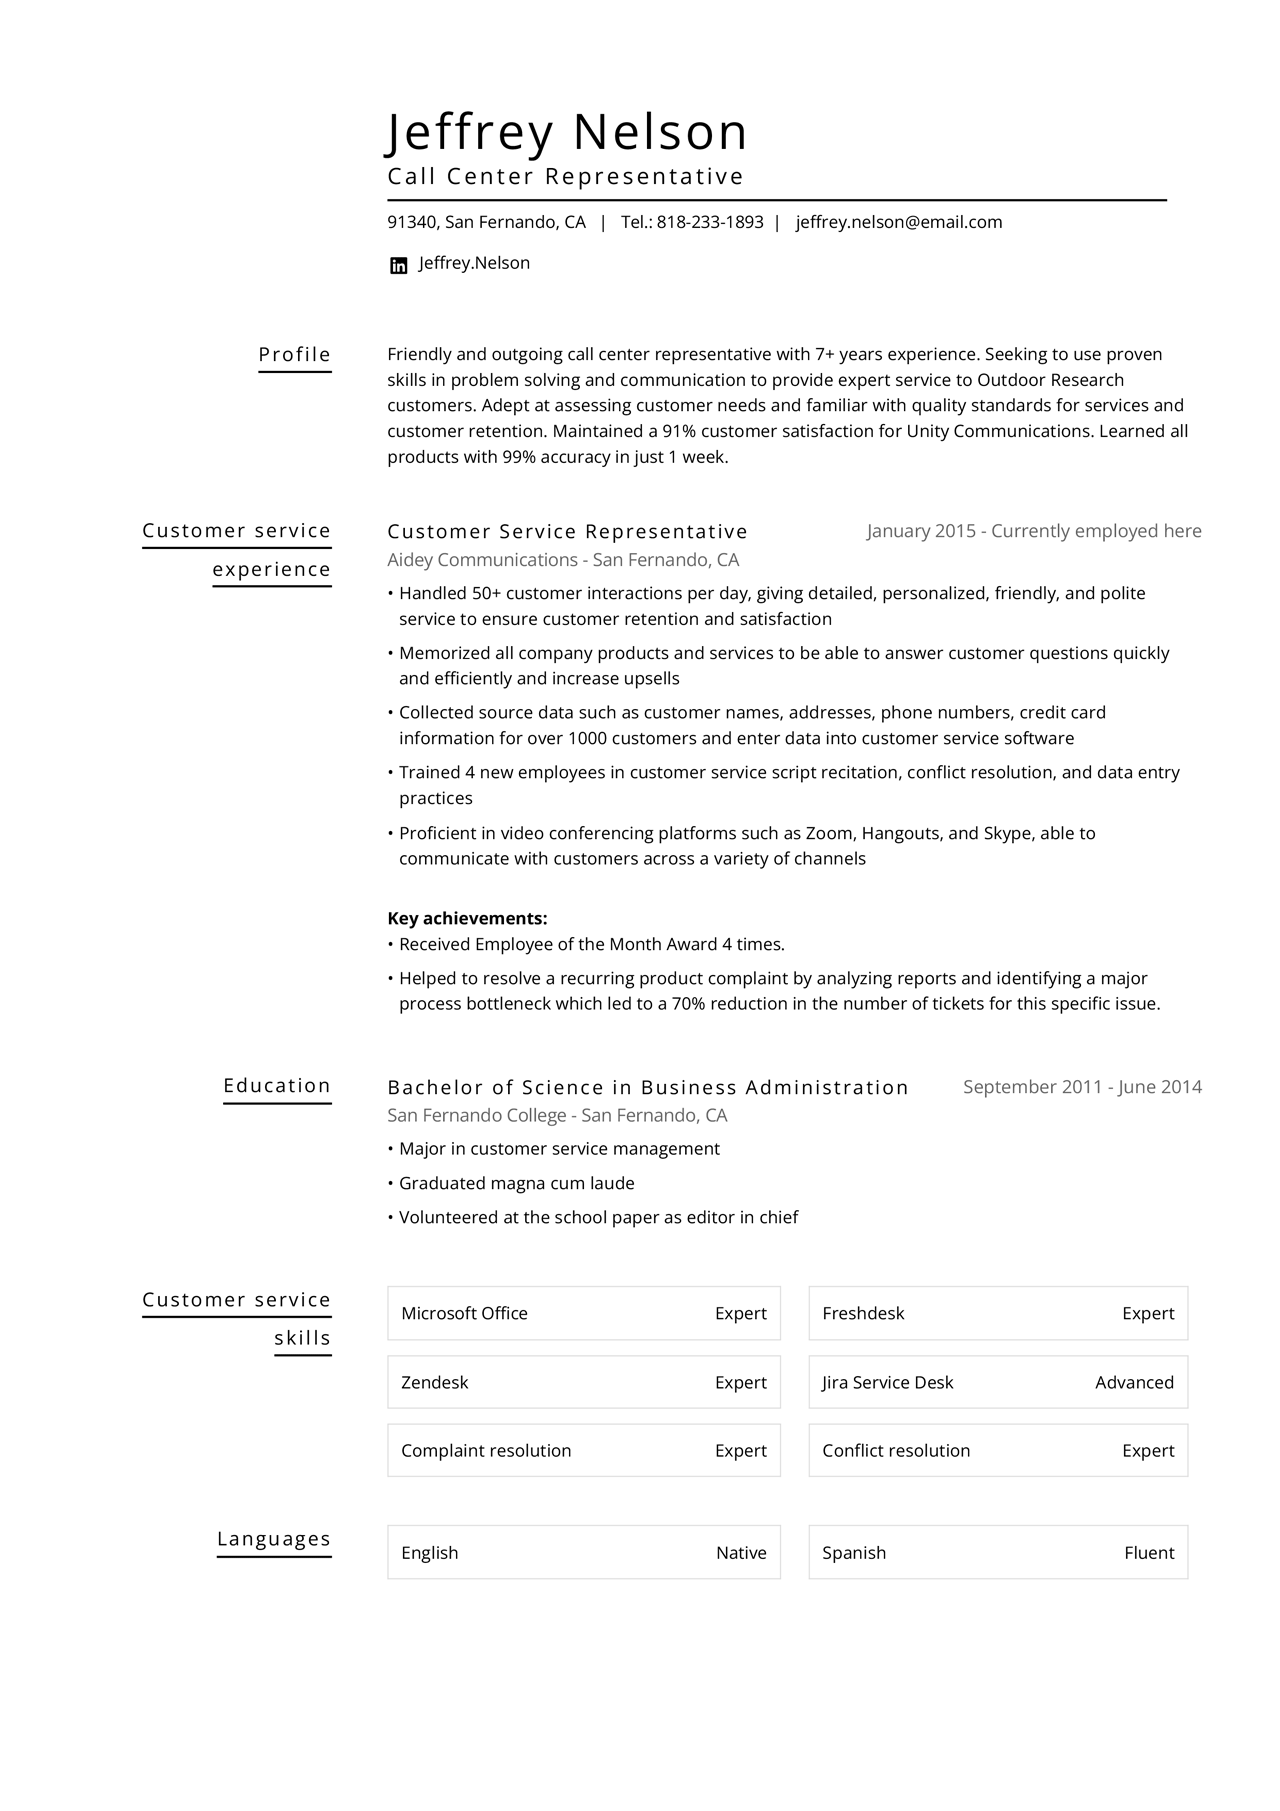 A finished call center customer service resume example